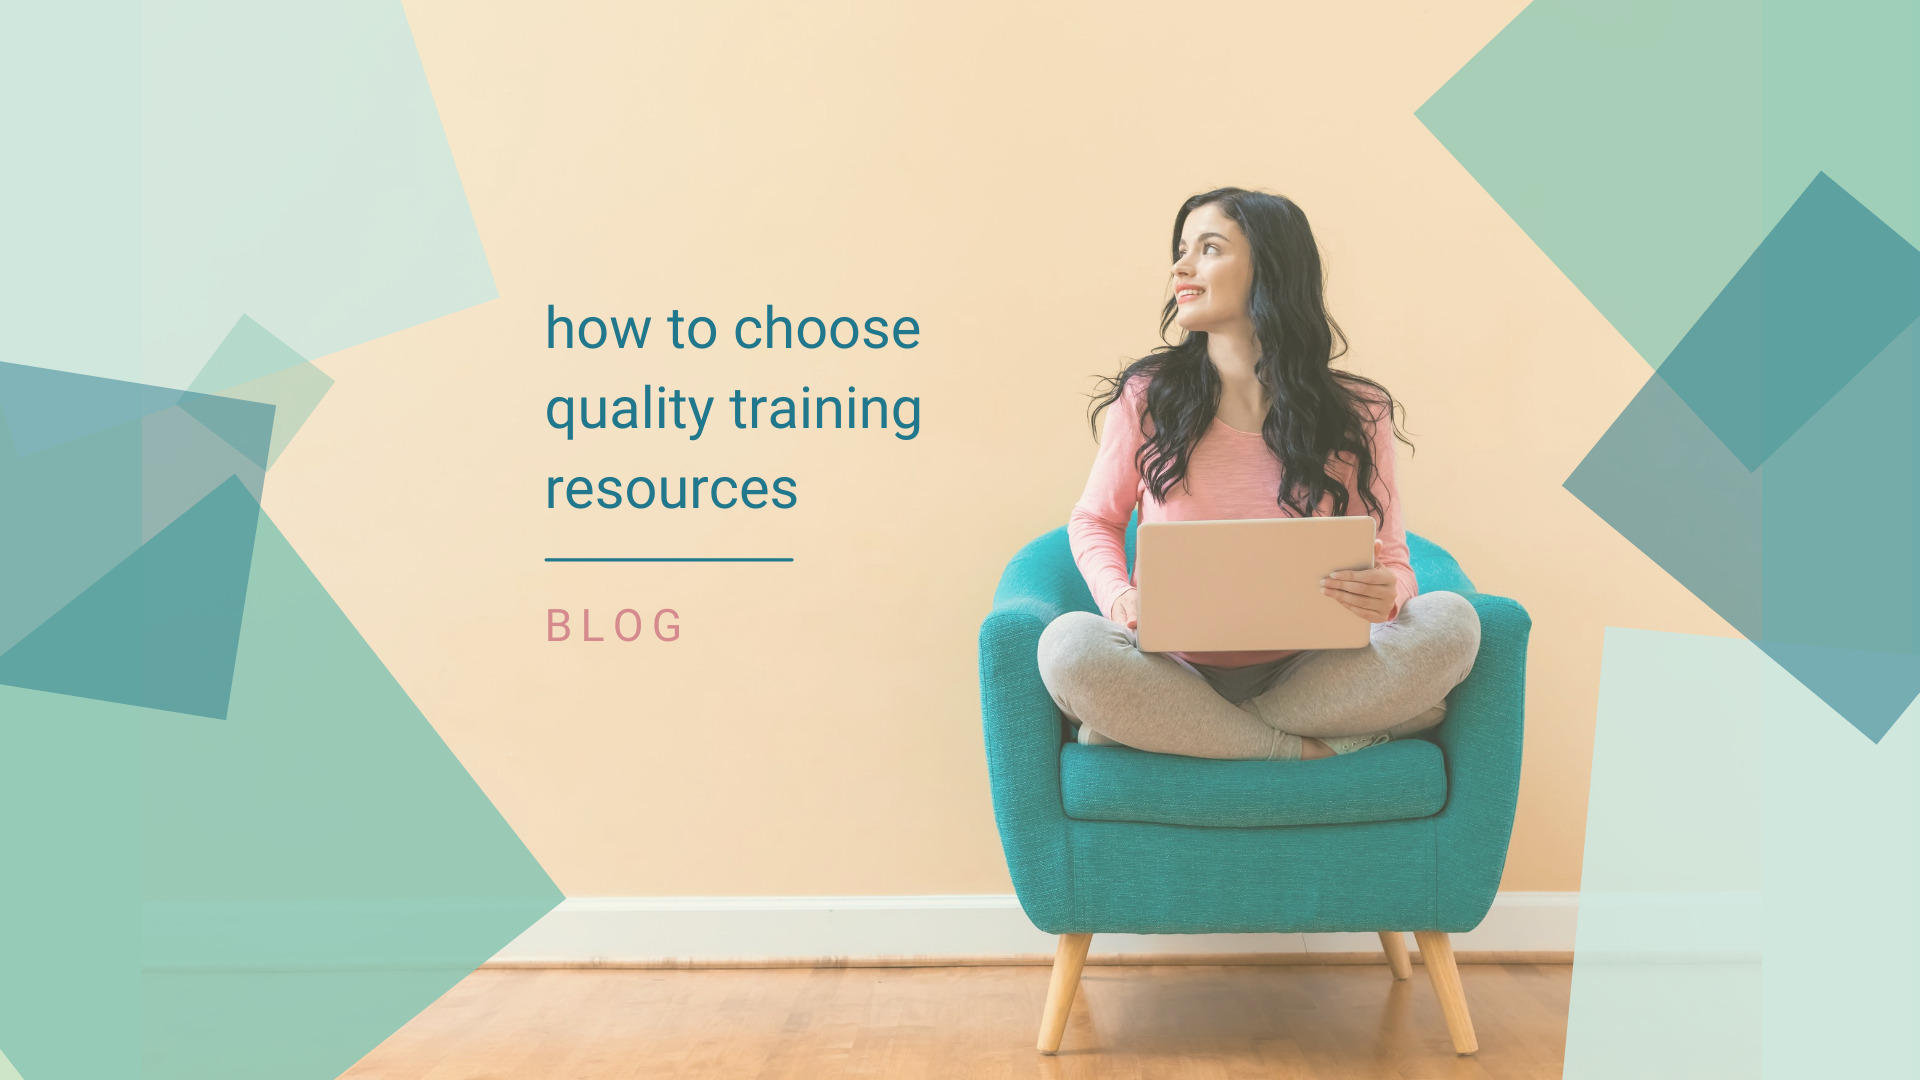 What RTOs need to consider when purchasing quality training resources